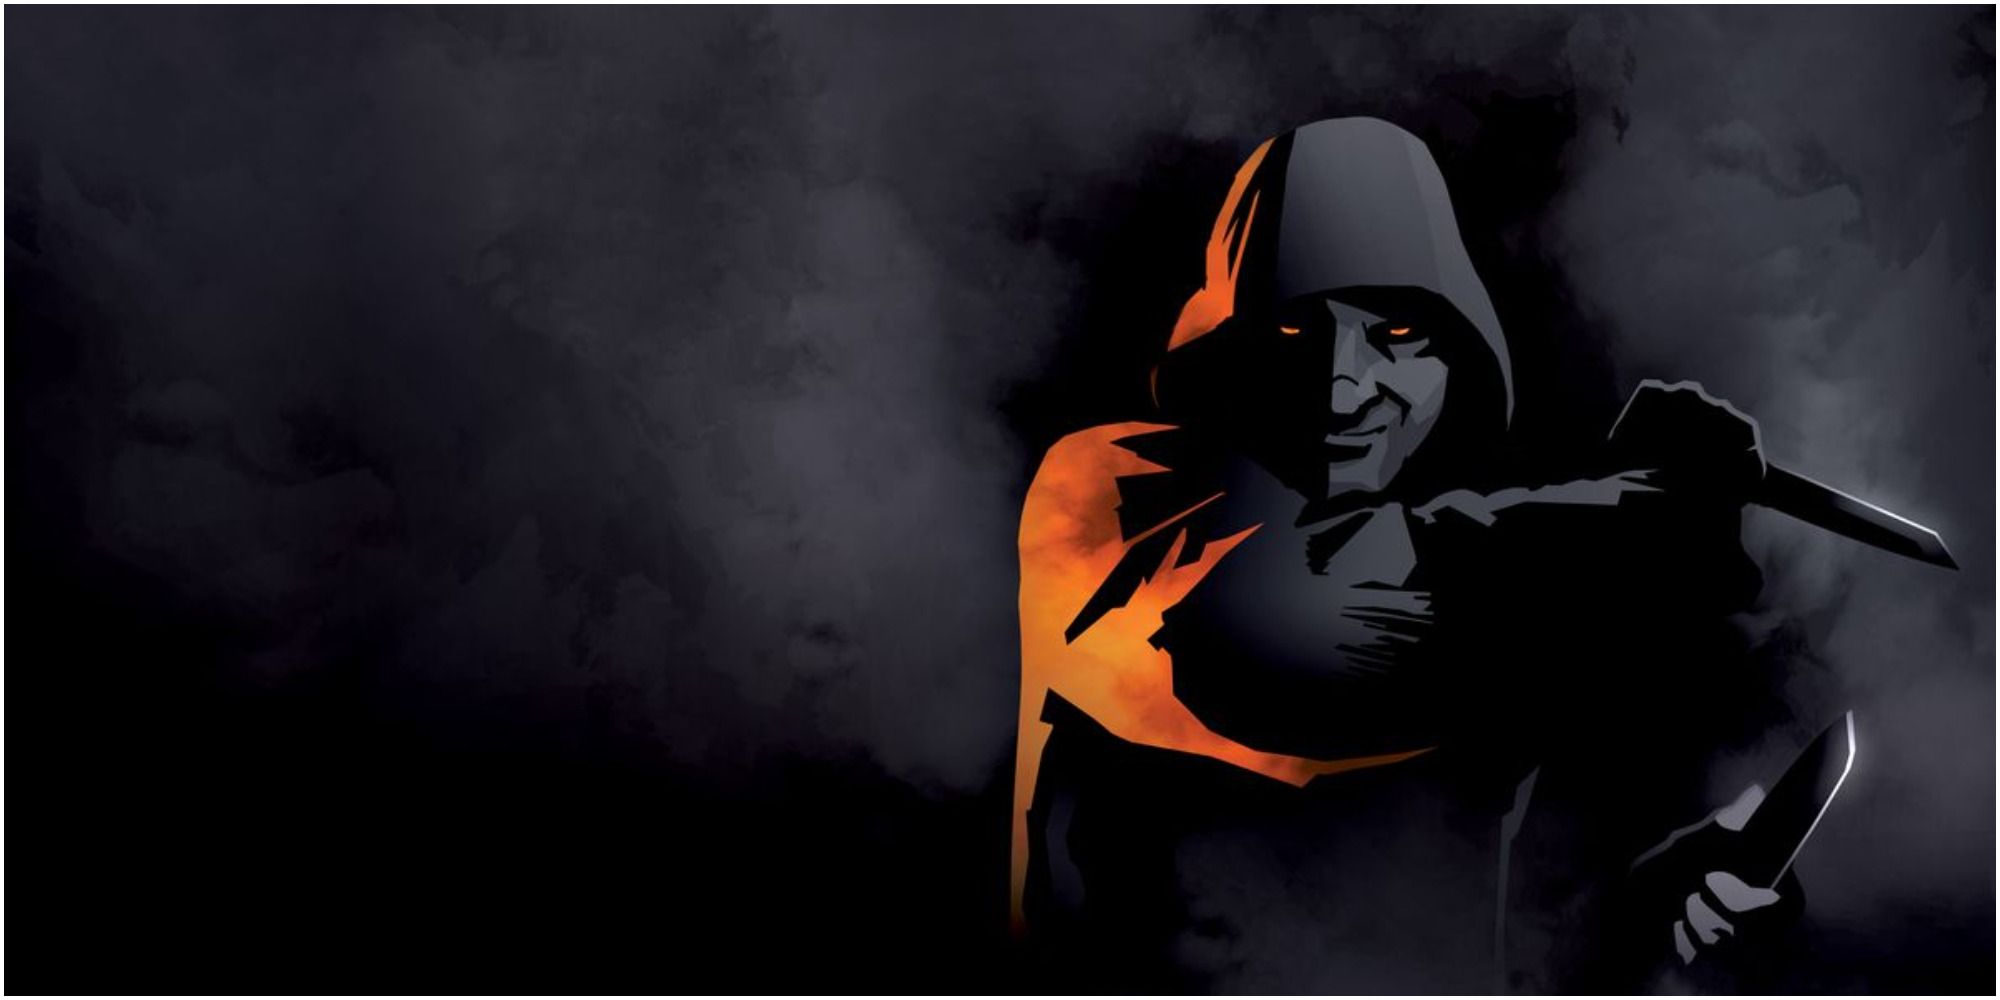 A cloaked figure from promotional images for Blades in the Dark